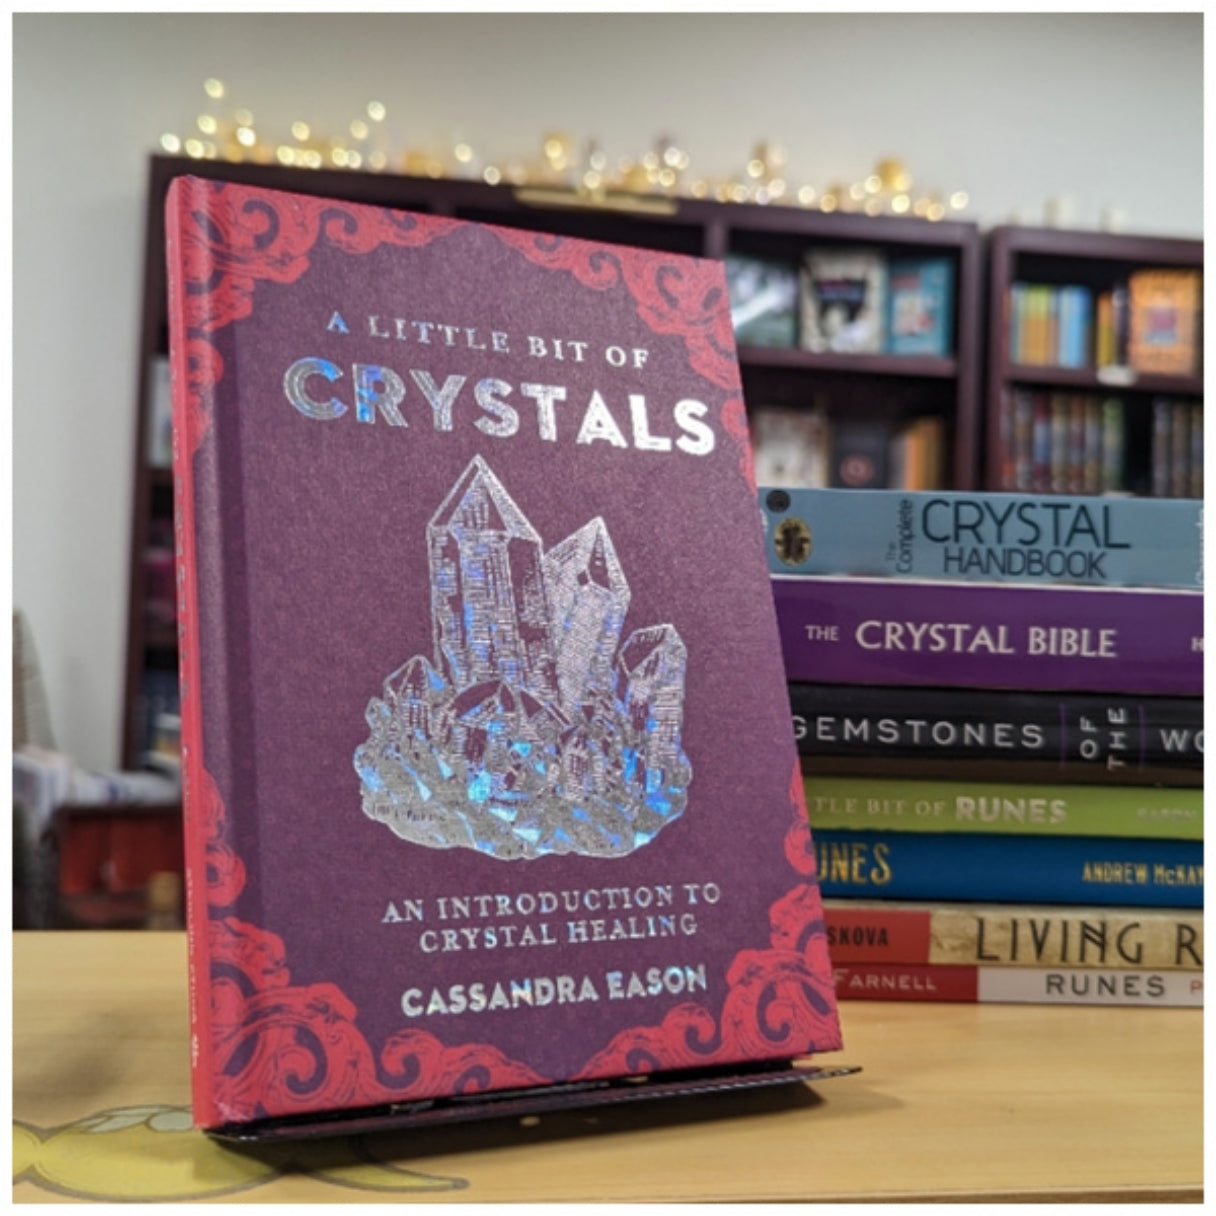 A Little Bit of Crystals: An Introduction to Crystal Healing (Volume 3) (Little Bit Series)